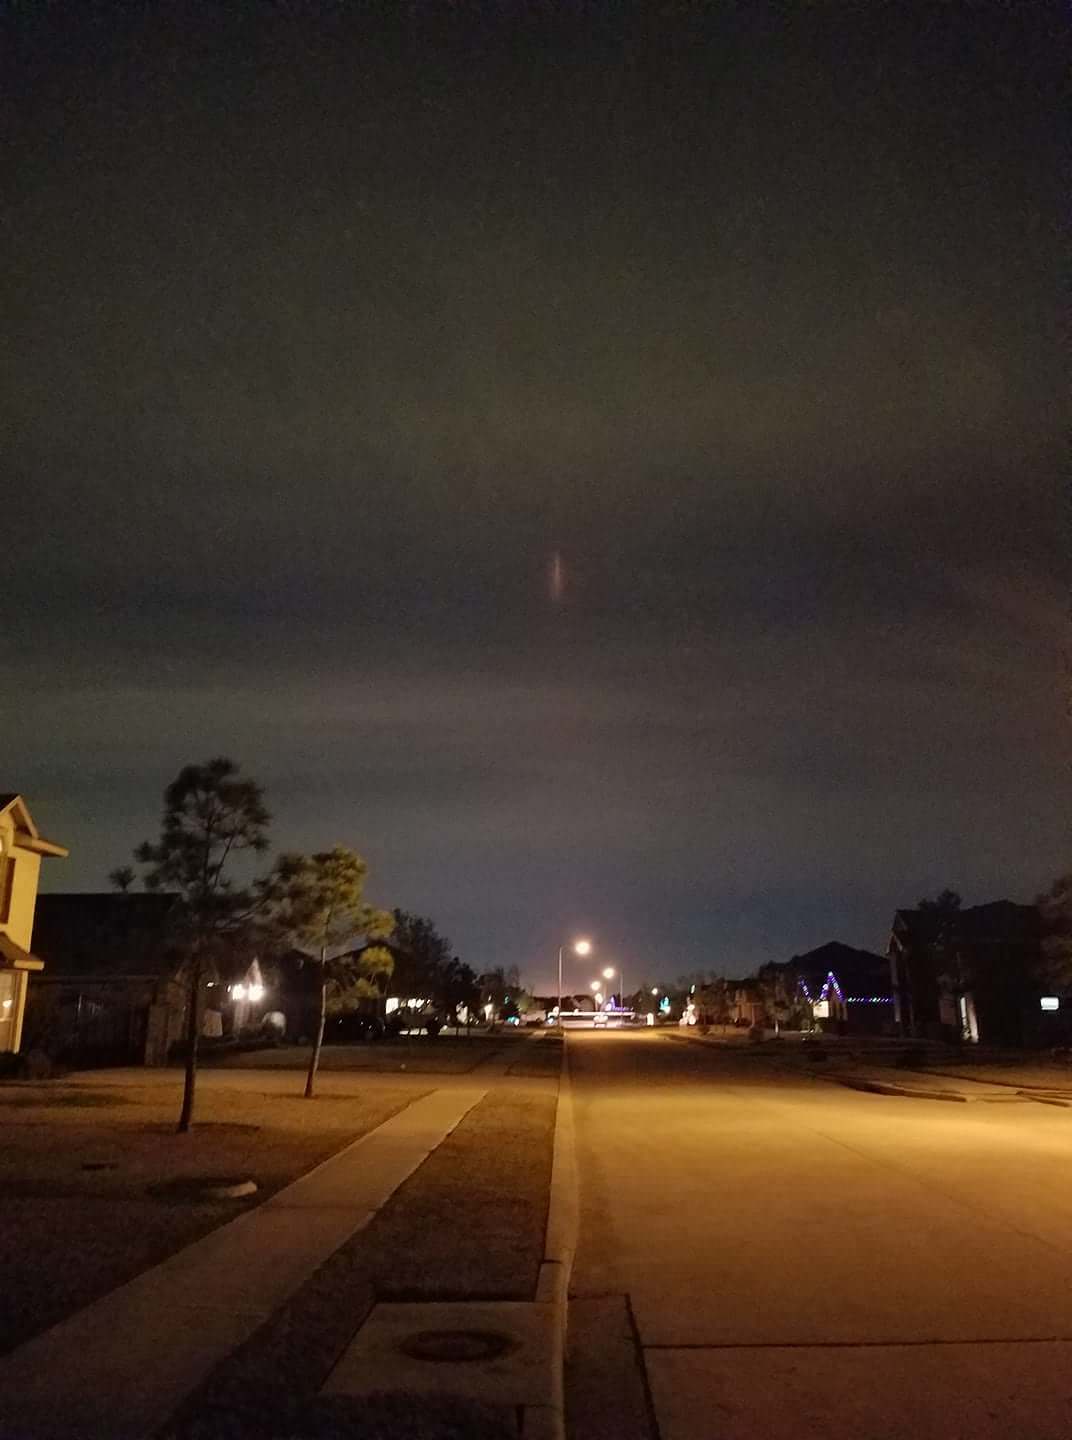 Weird Lights in Texas’ Night Sky May Come With Scientific Explanation